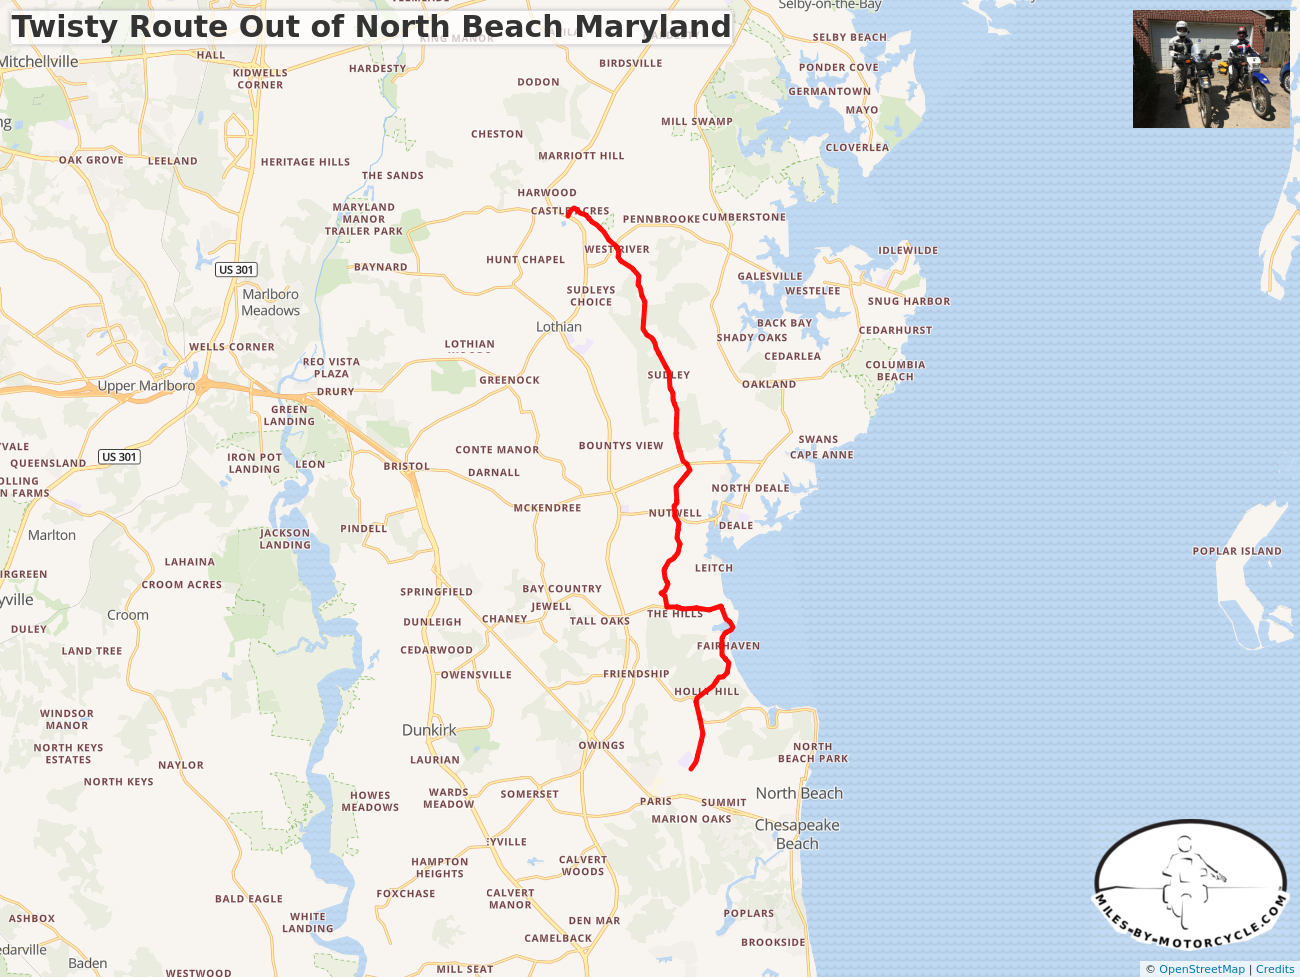 Twisty Route Out of North Beach Maryland